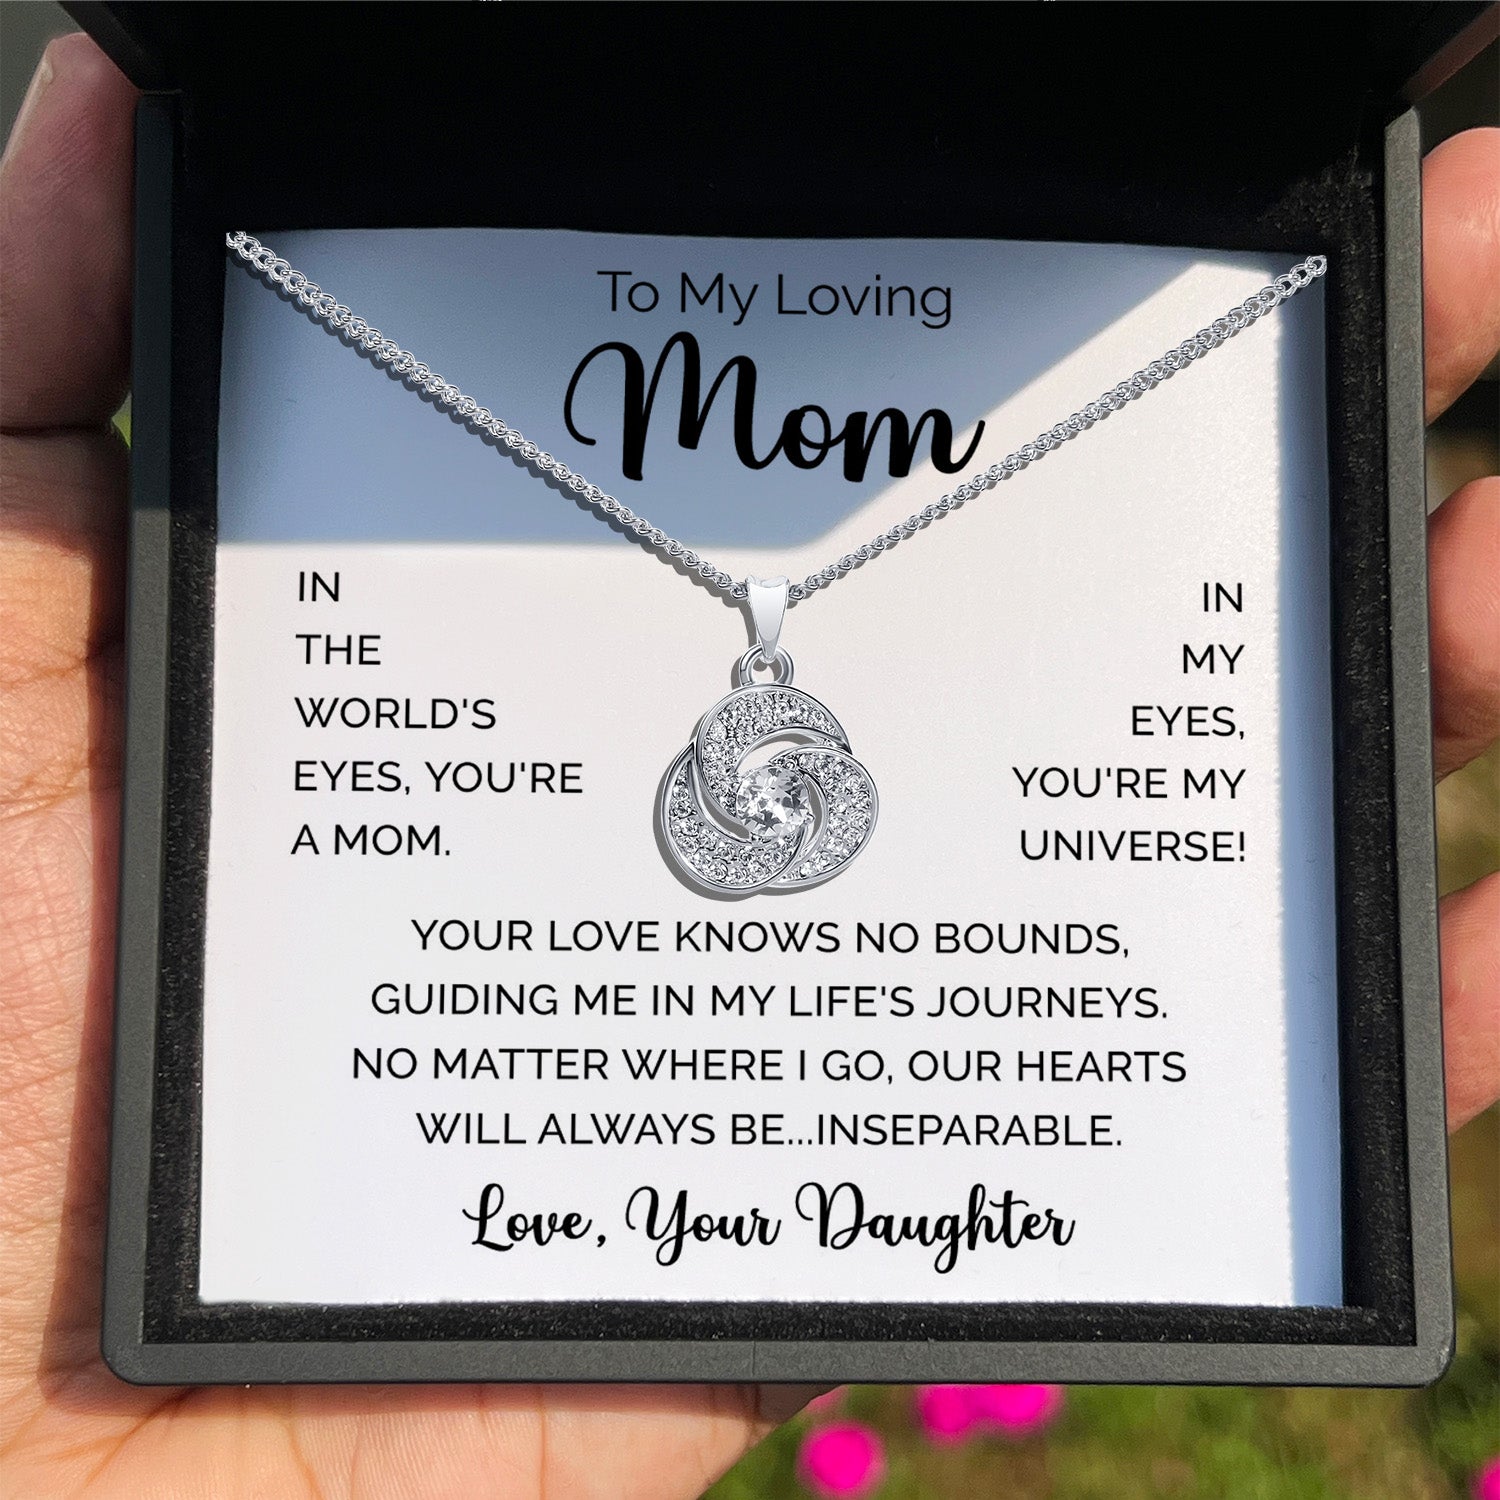 To My Loving Mom - You're My Universe! - Tryndi Love Knot Necklace